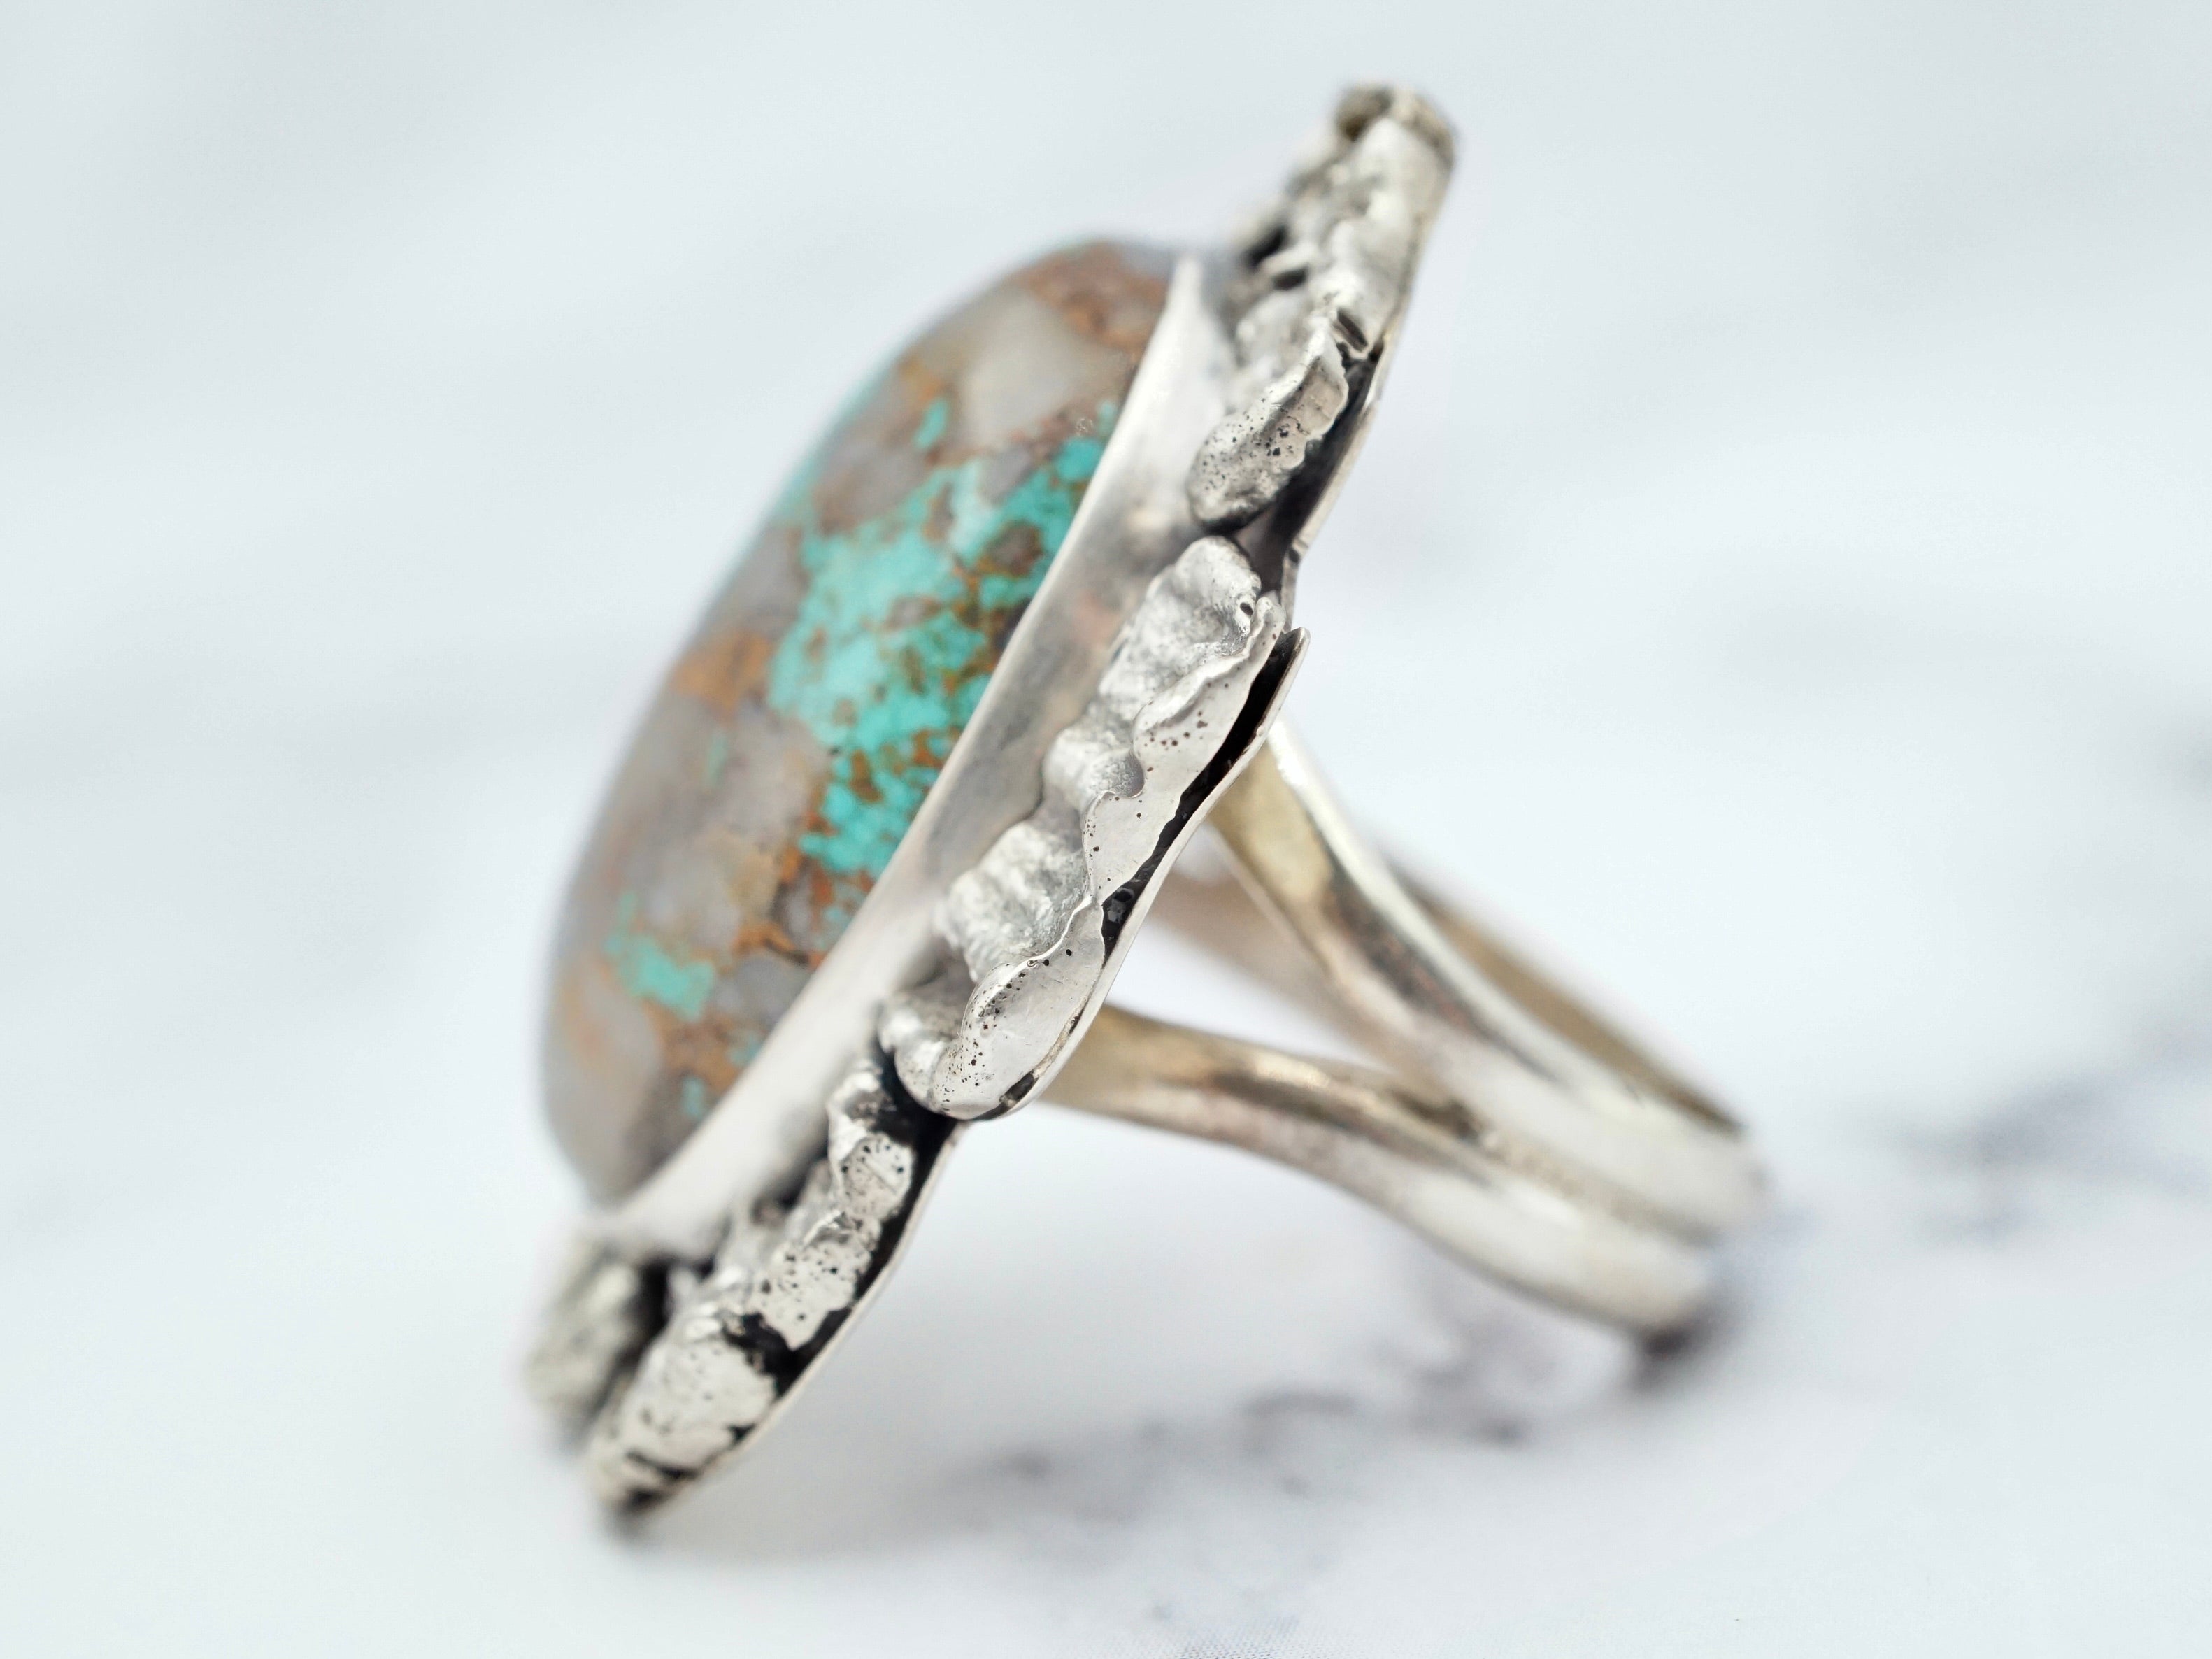 Vintage Navajo Brutalist sterling and green turquoise with quartz inclusions ring by Ronald Tom, size 8